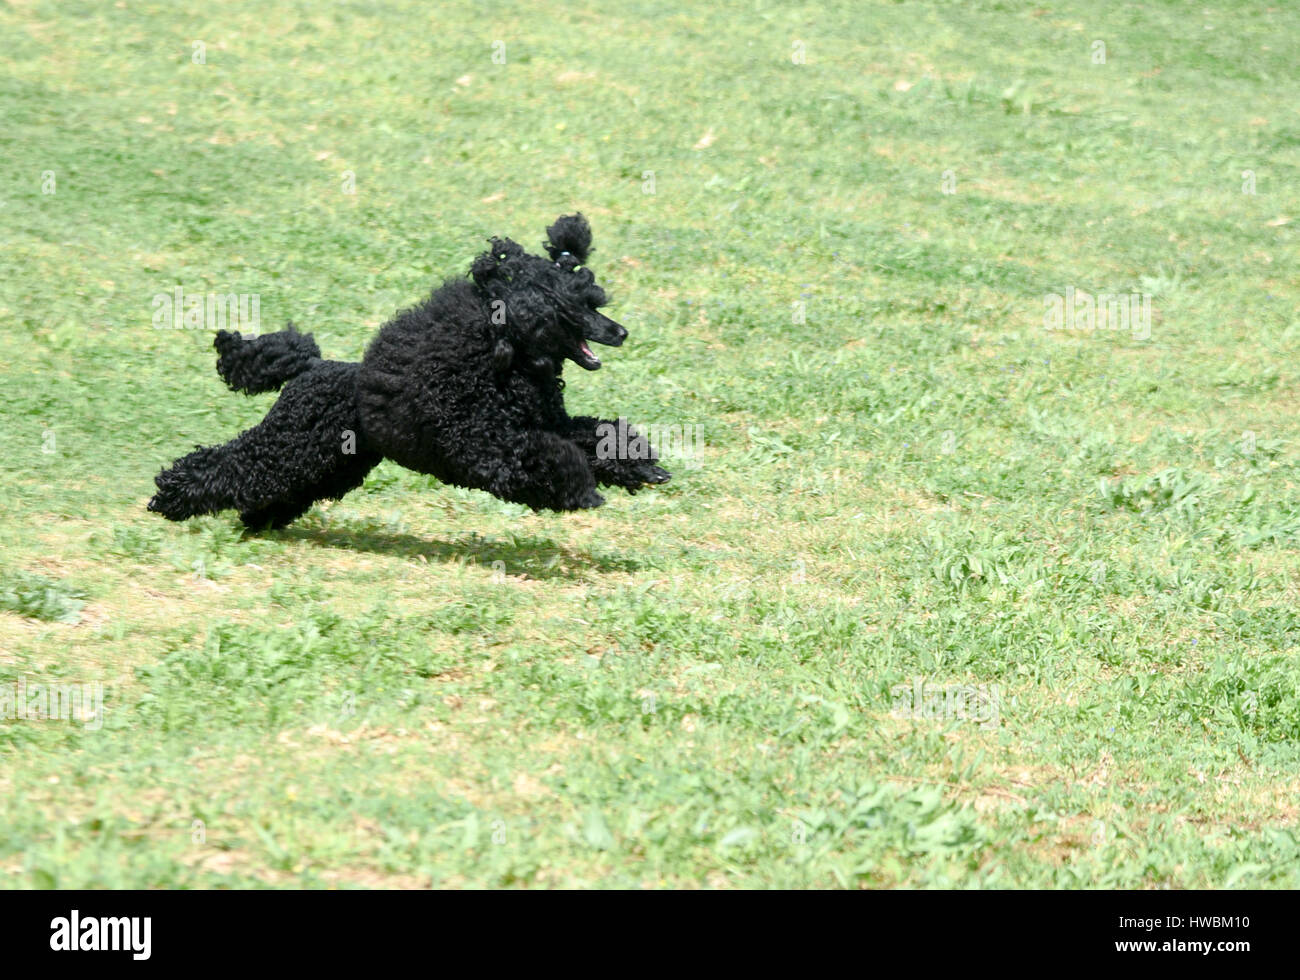 Playful Black Miniature Poodle running on the grass outside Stock Photo